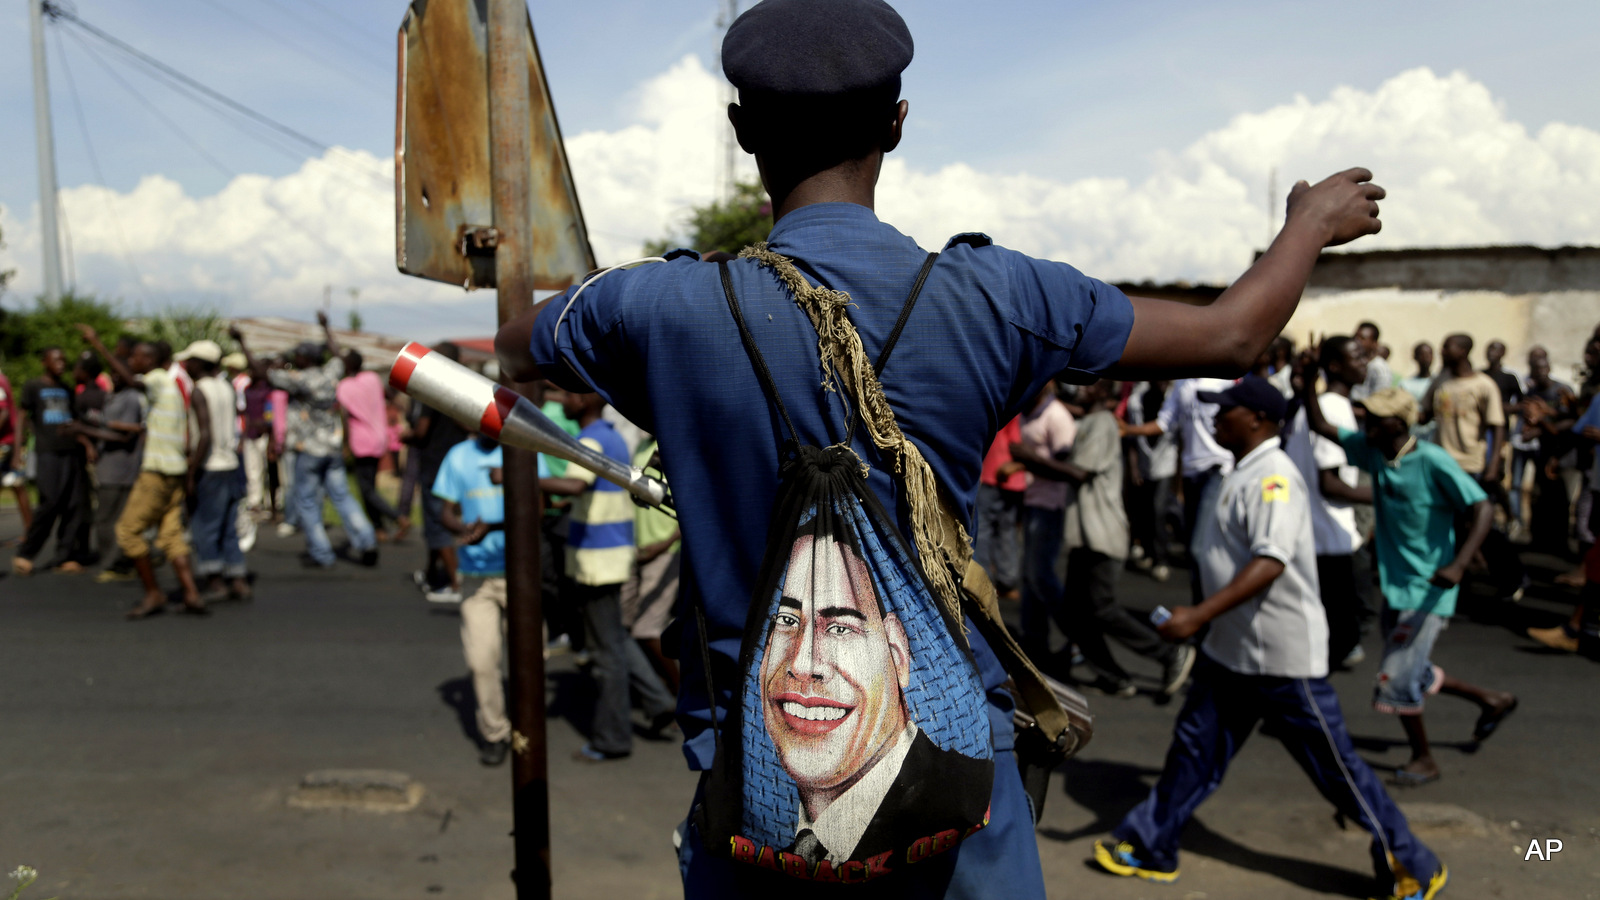 A police officer with a bag depicted the image of US President Barack Obama, stands on patrol as protesters march through the Musaga district of Bujumbura, in Burundi, Monday, May 11, 2015. Police and army negotiated with over 2000 protesters to allow delivery trucks to enter the city. One person was killed in a clash with Burundi's police on Sunday in demonstrations in the capital, Bujumbura, as the government ordered a ban on any further street protests over President Pierre Nkurunziza's bid for a third term in power.